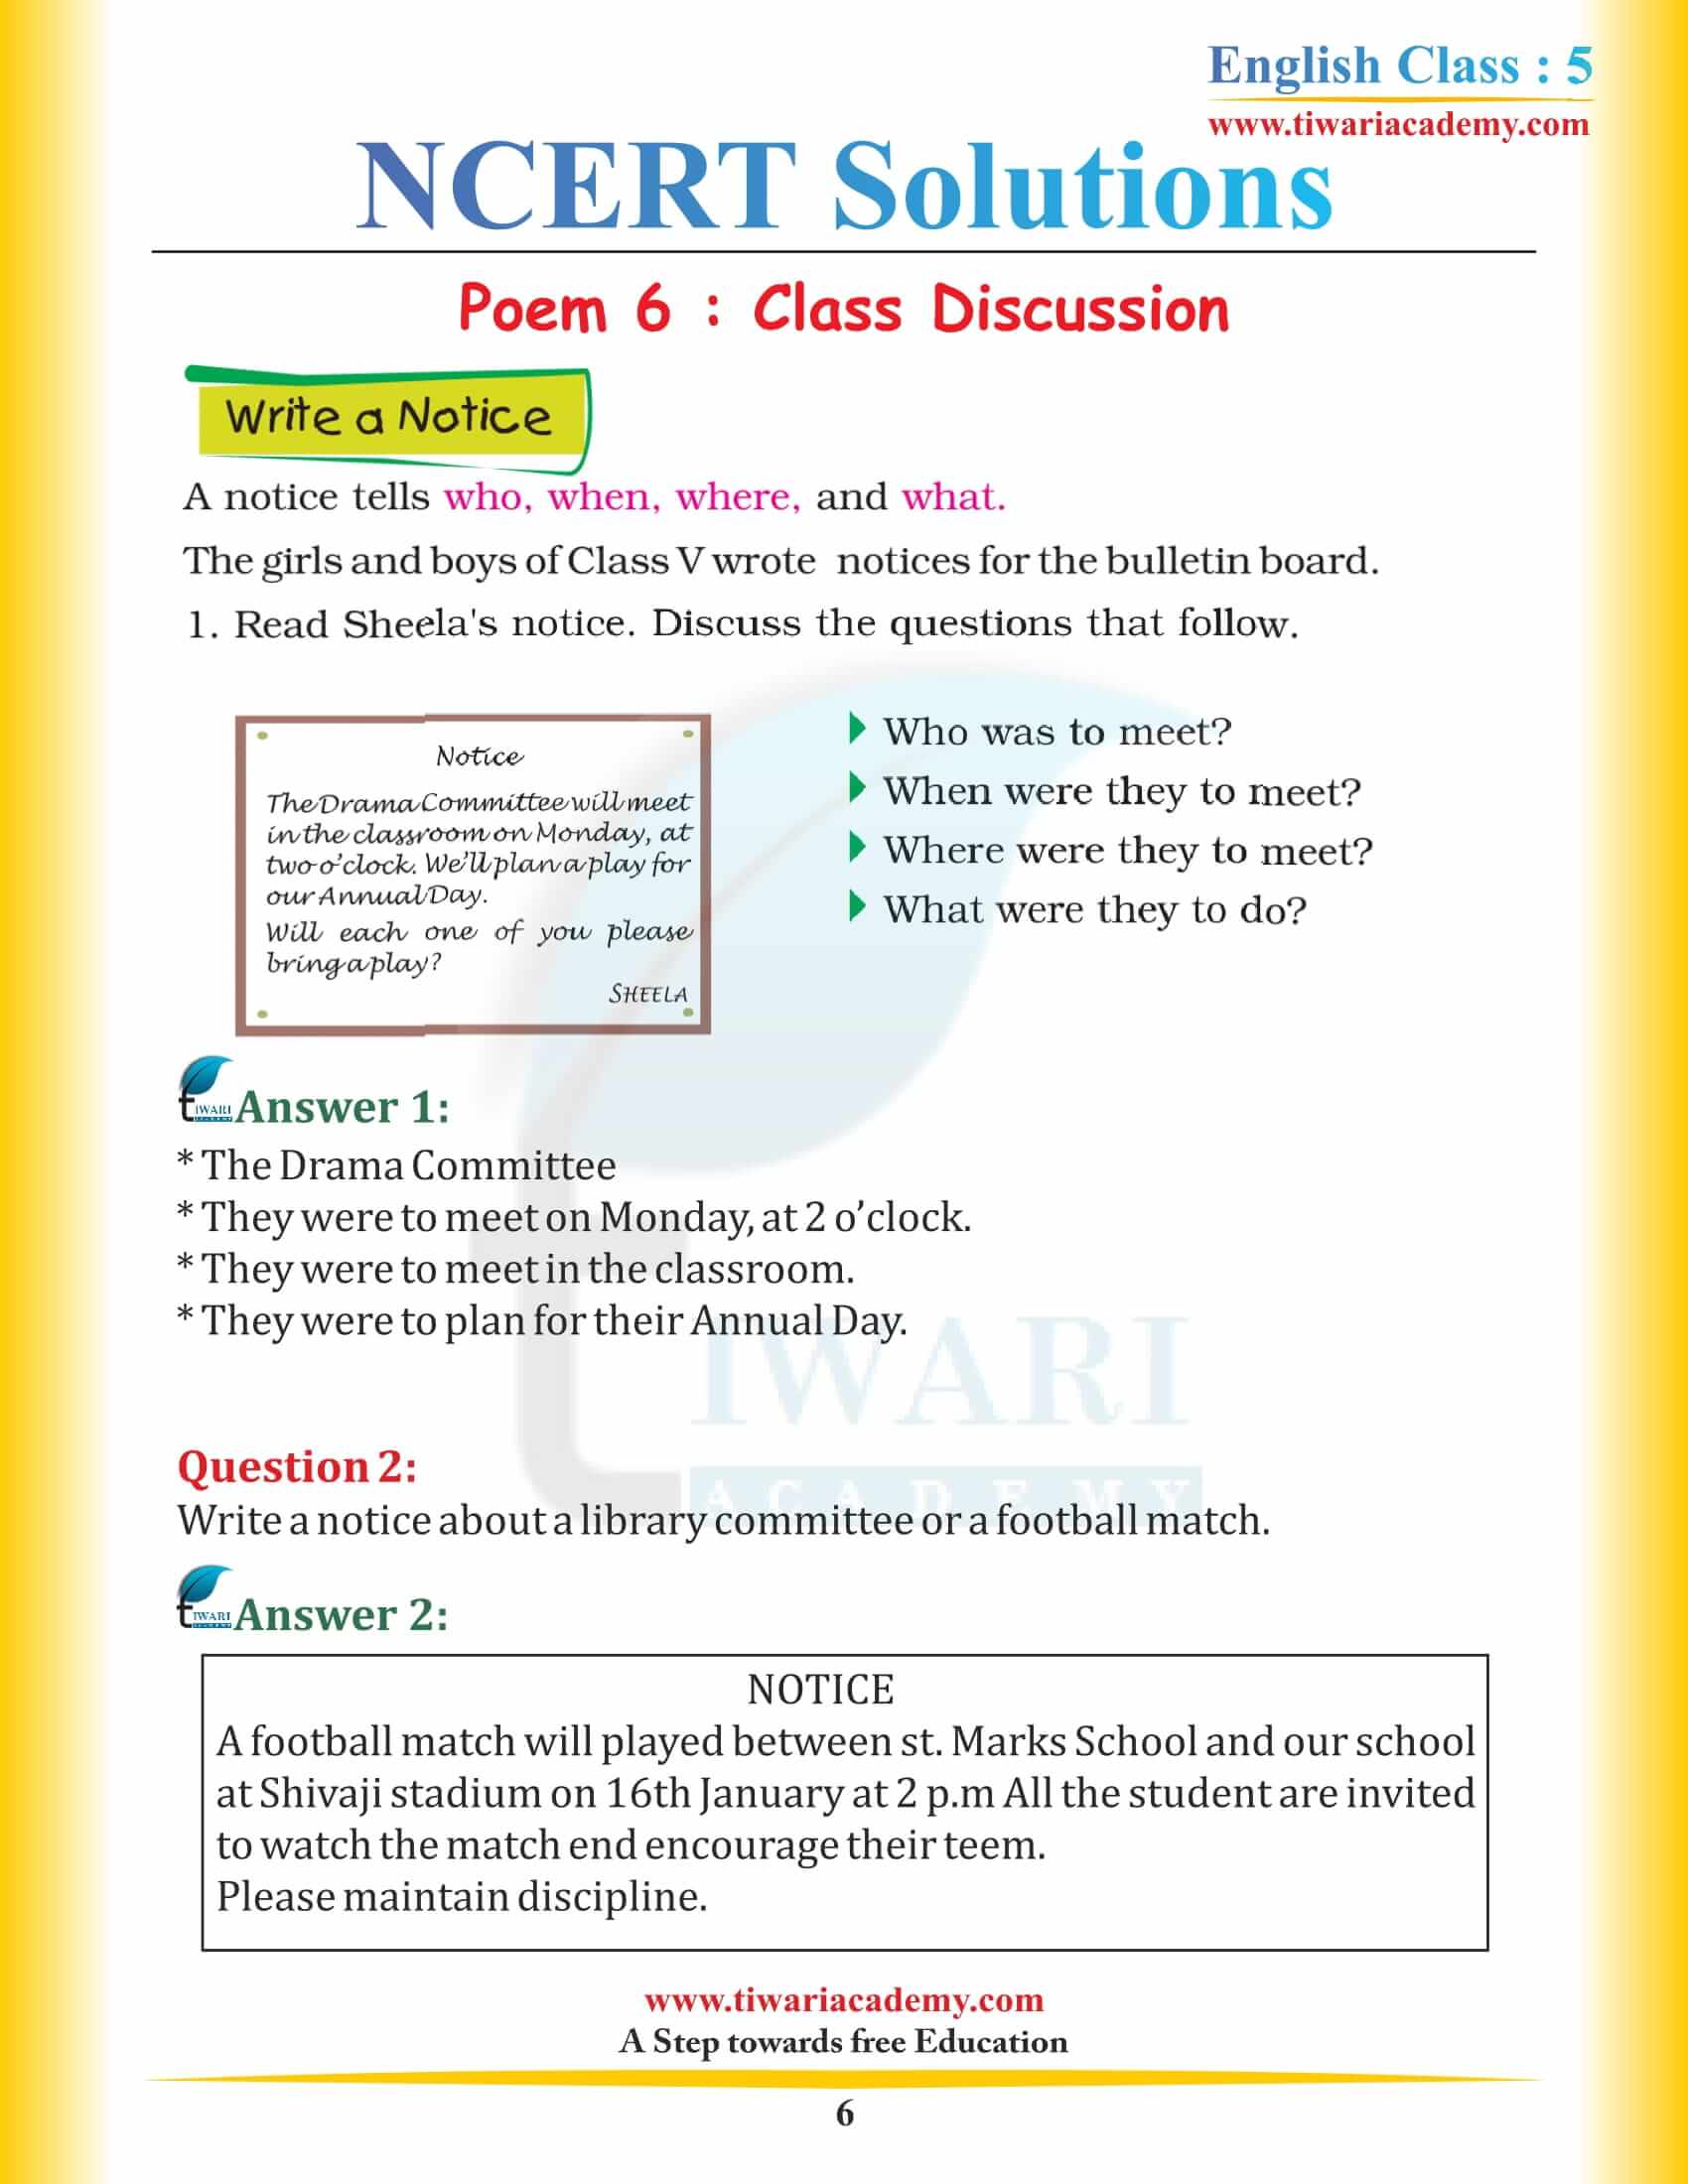 NCERT Solutions for Class 5 English Chapter 6 Class Discussion free sols